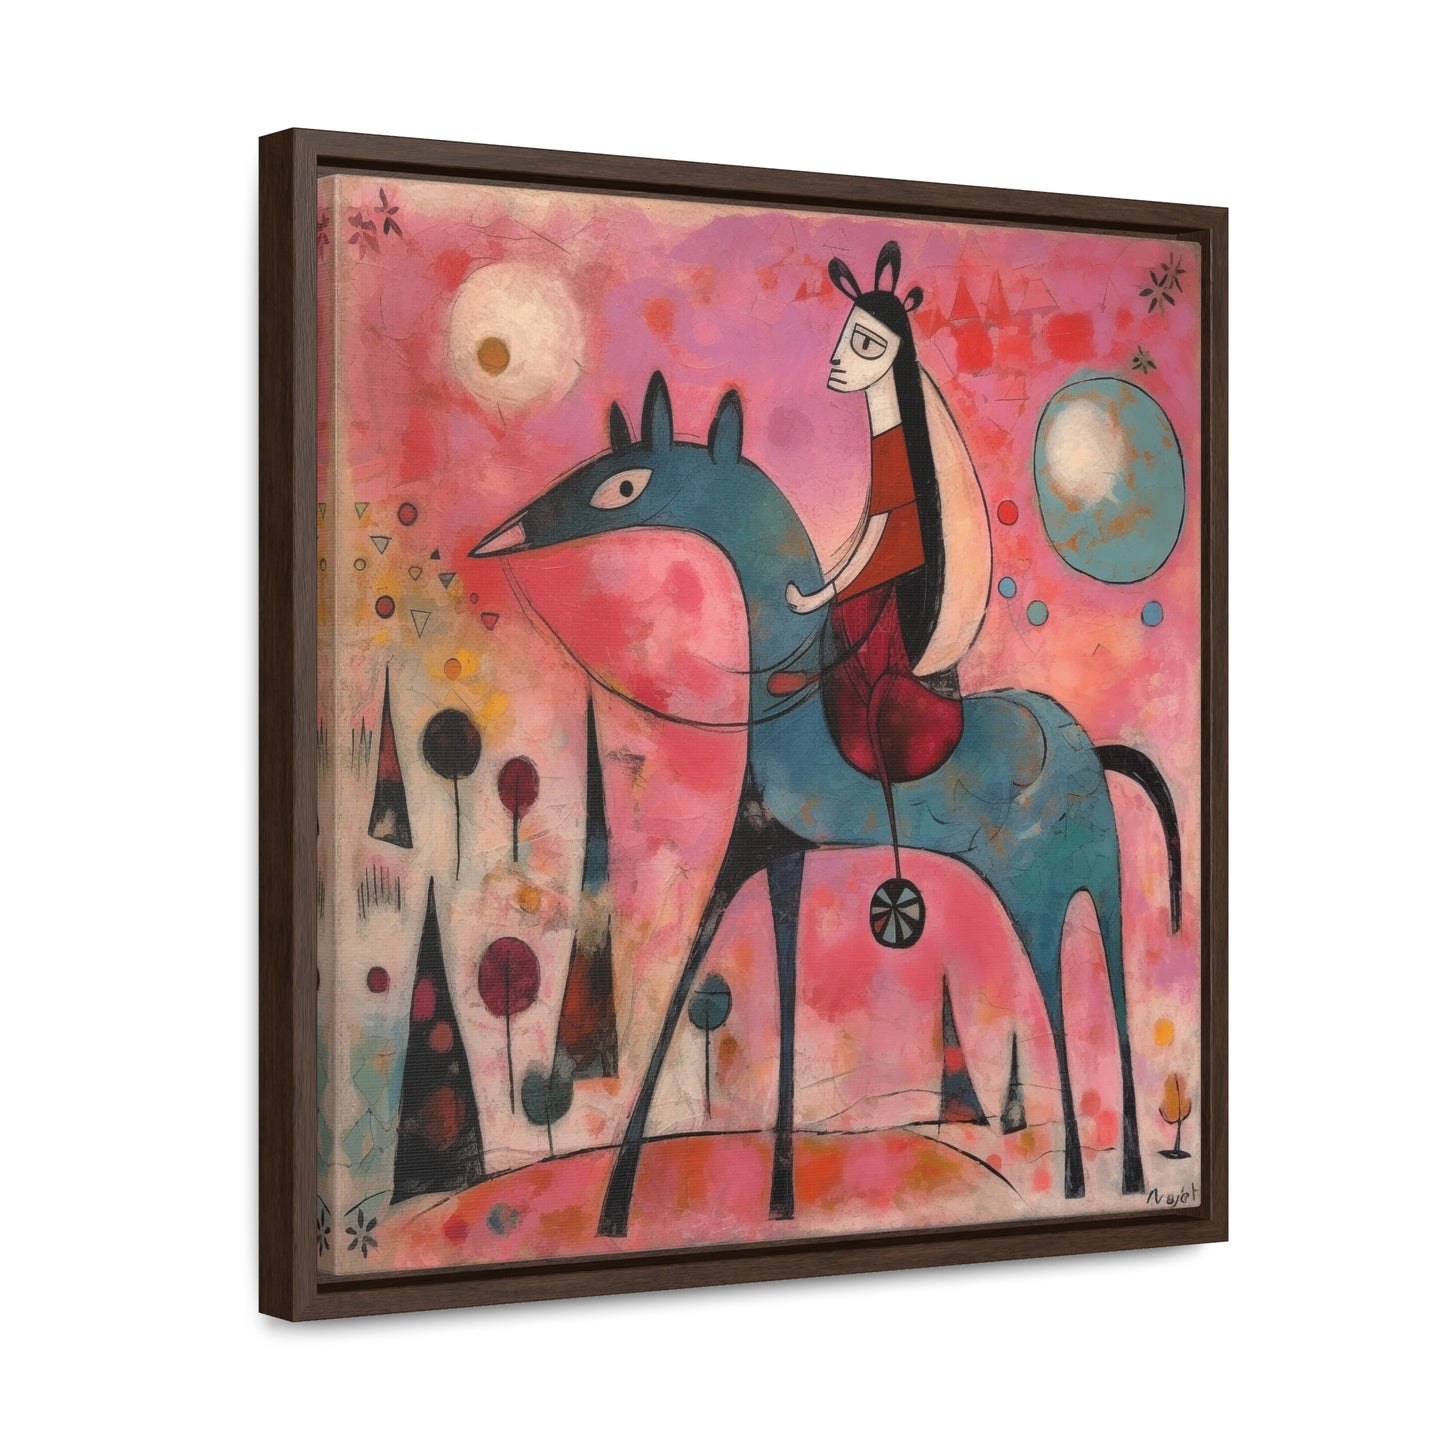 The Dreams of the Child 45, Gallery Canvas Wraps, Square Frame